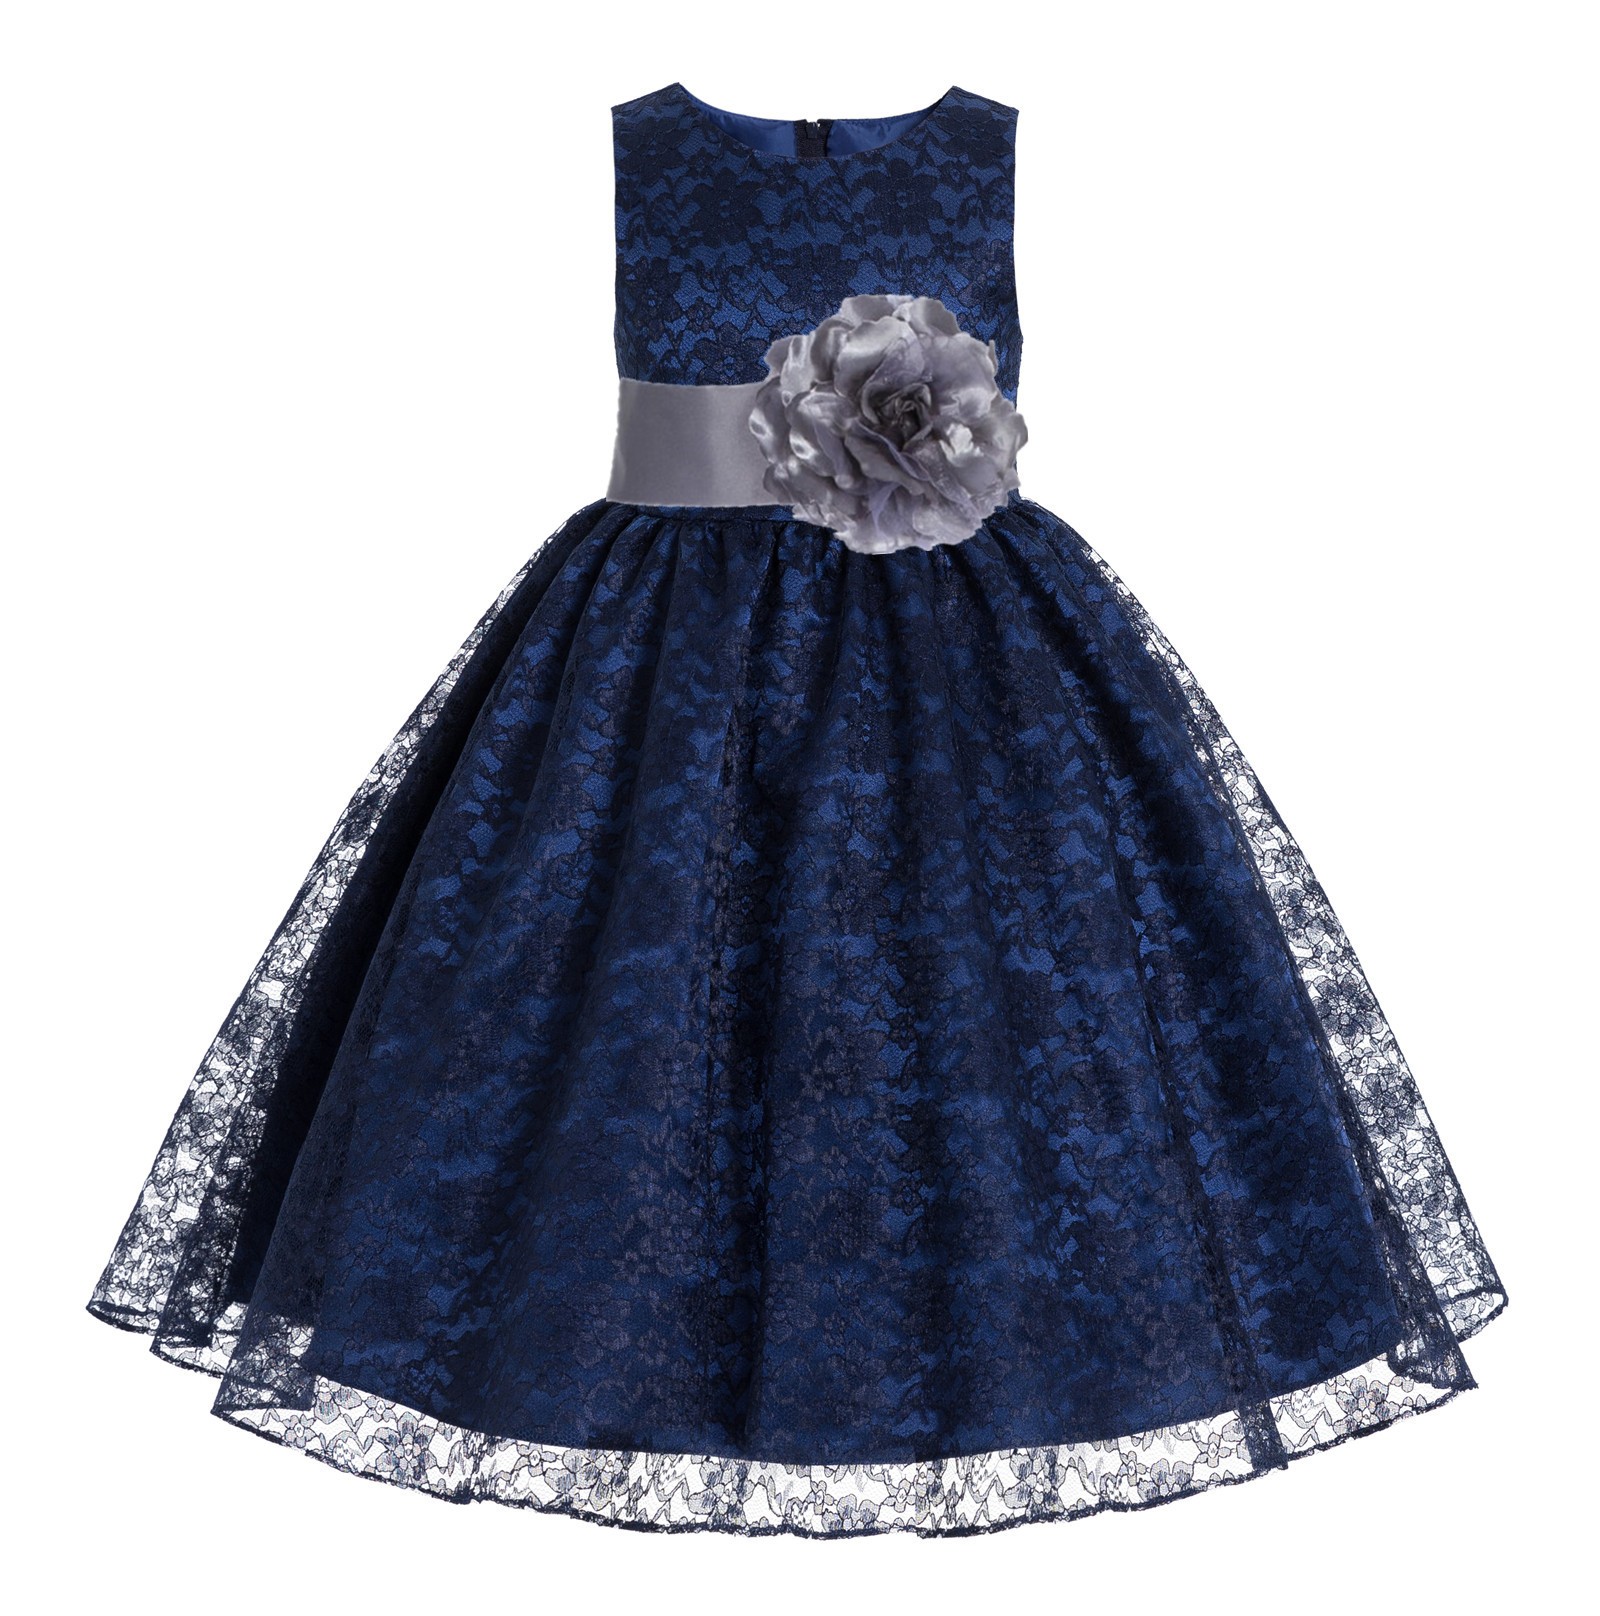 Navy / Mercury Floral Lace Overlay Flower Girl Dress Lace Dresses 163s